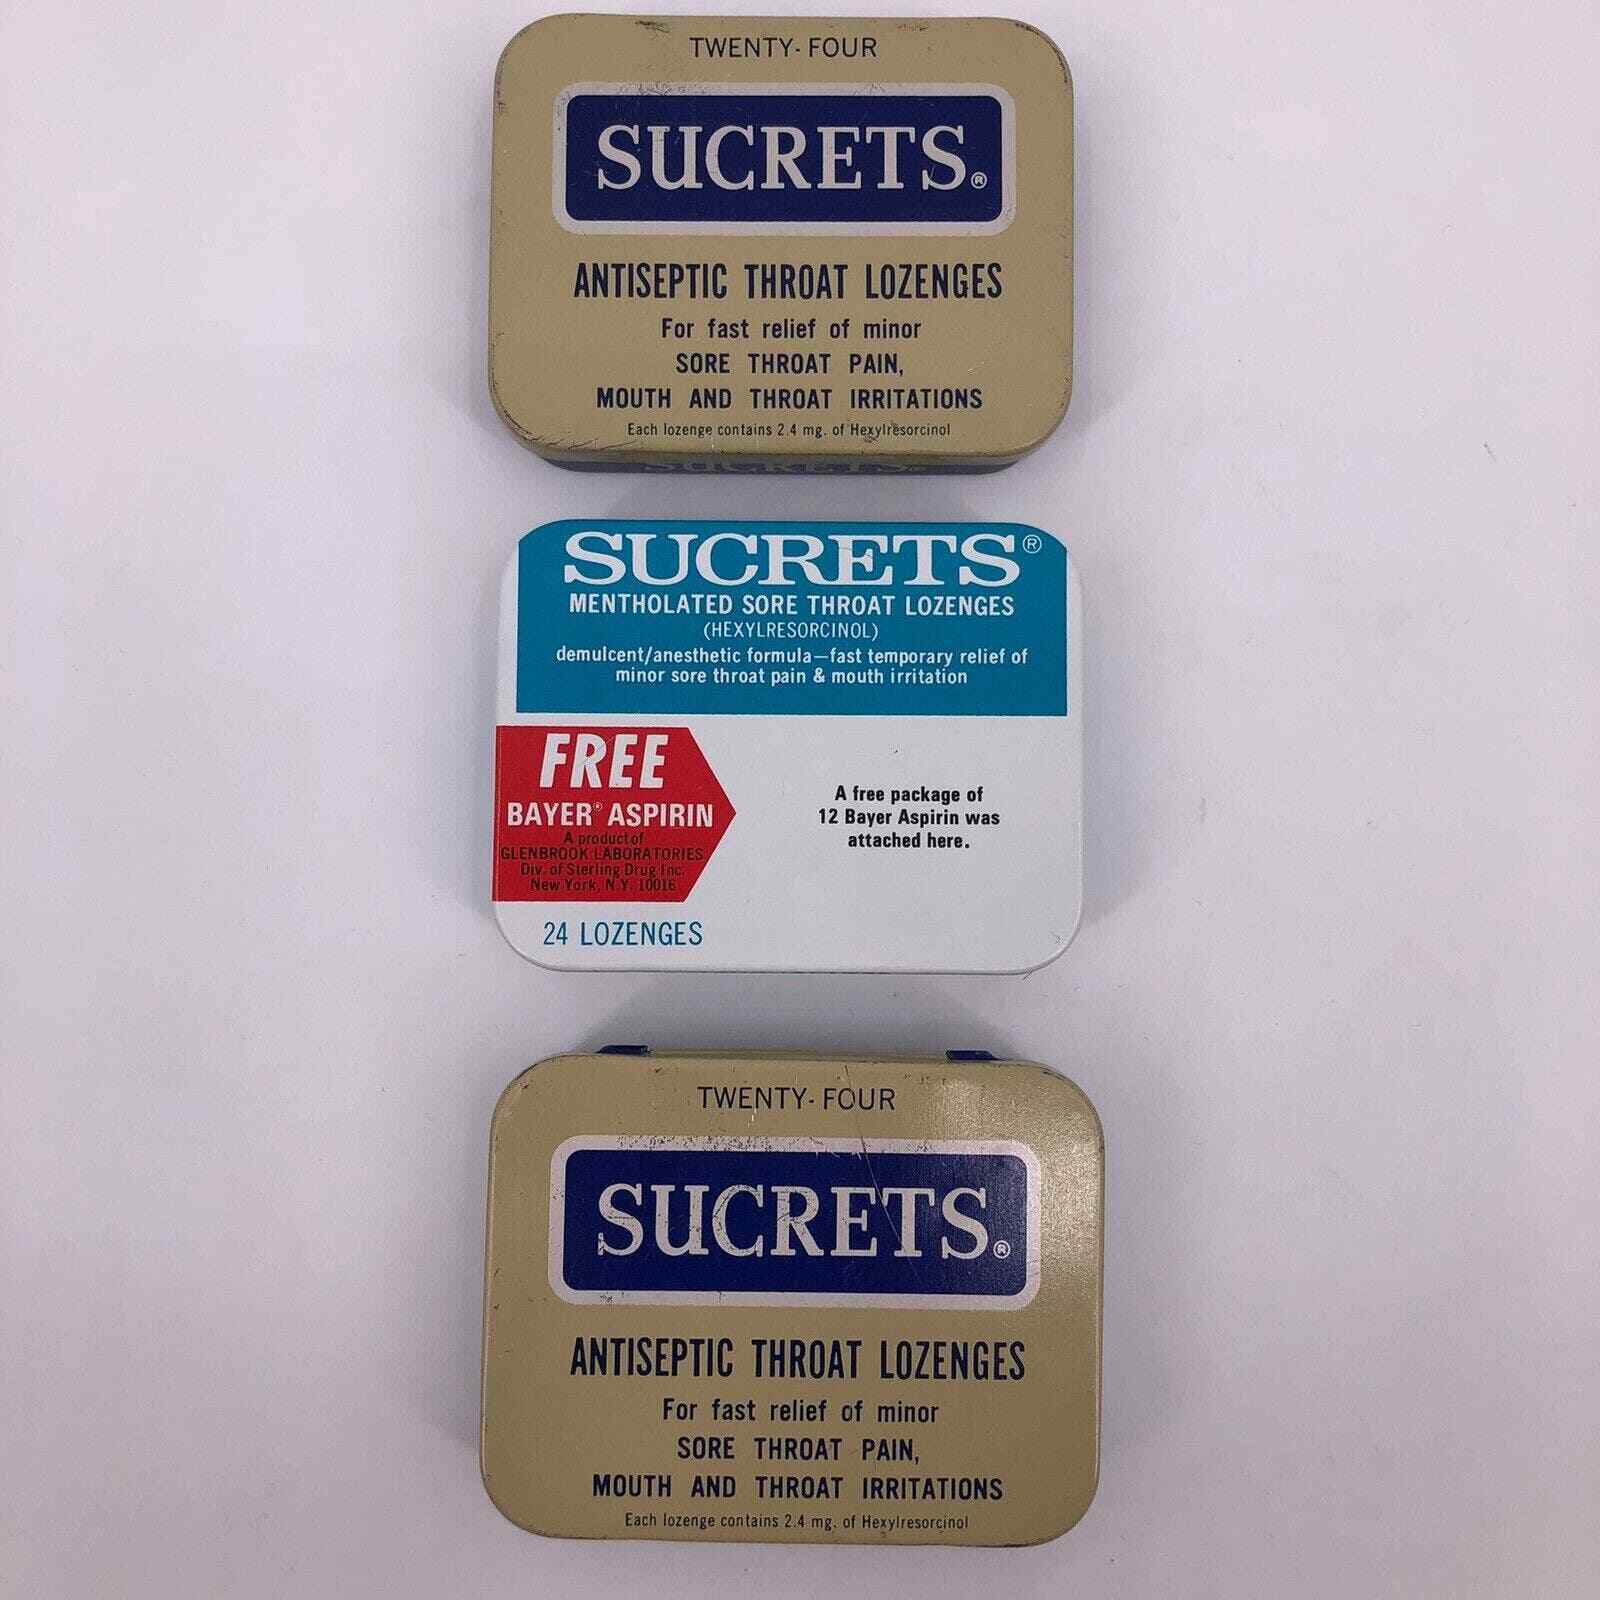 Vintage Sucrets Antiseptic Throat Lozenges Tins EMPTY Mentholated Collectibles